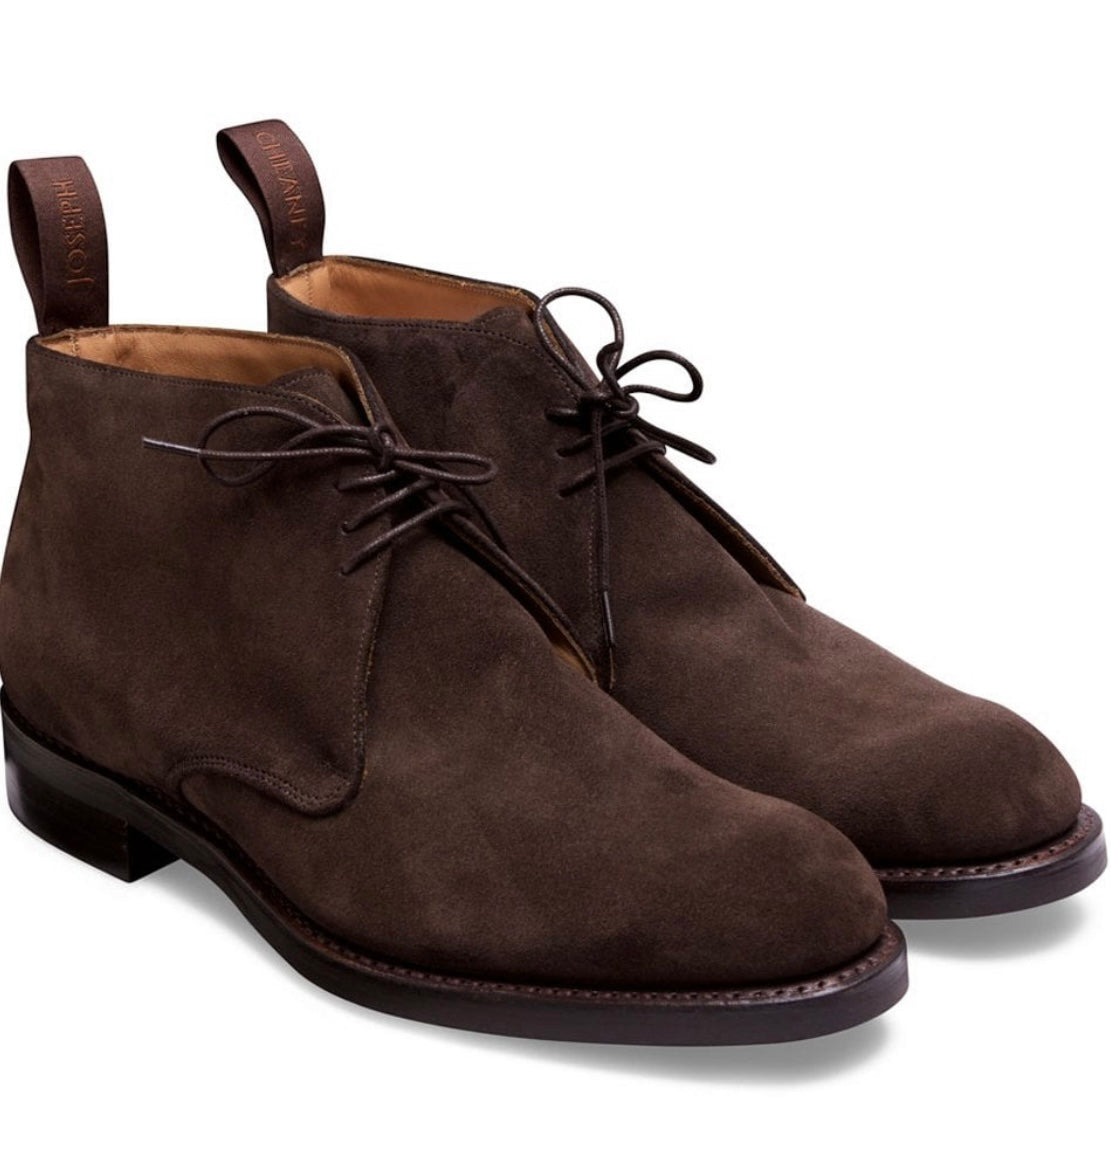 Cheaney Jackie III R Chukka Boot in Brown Suede